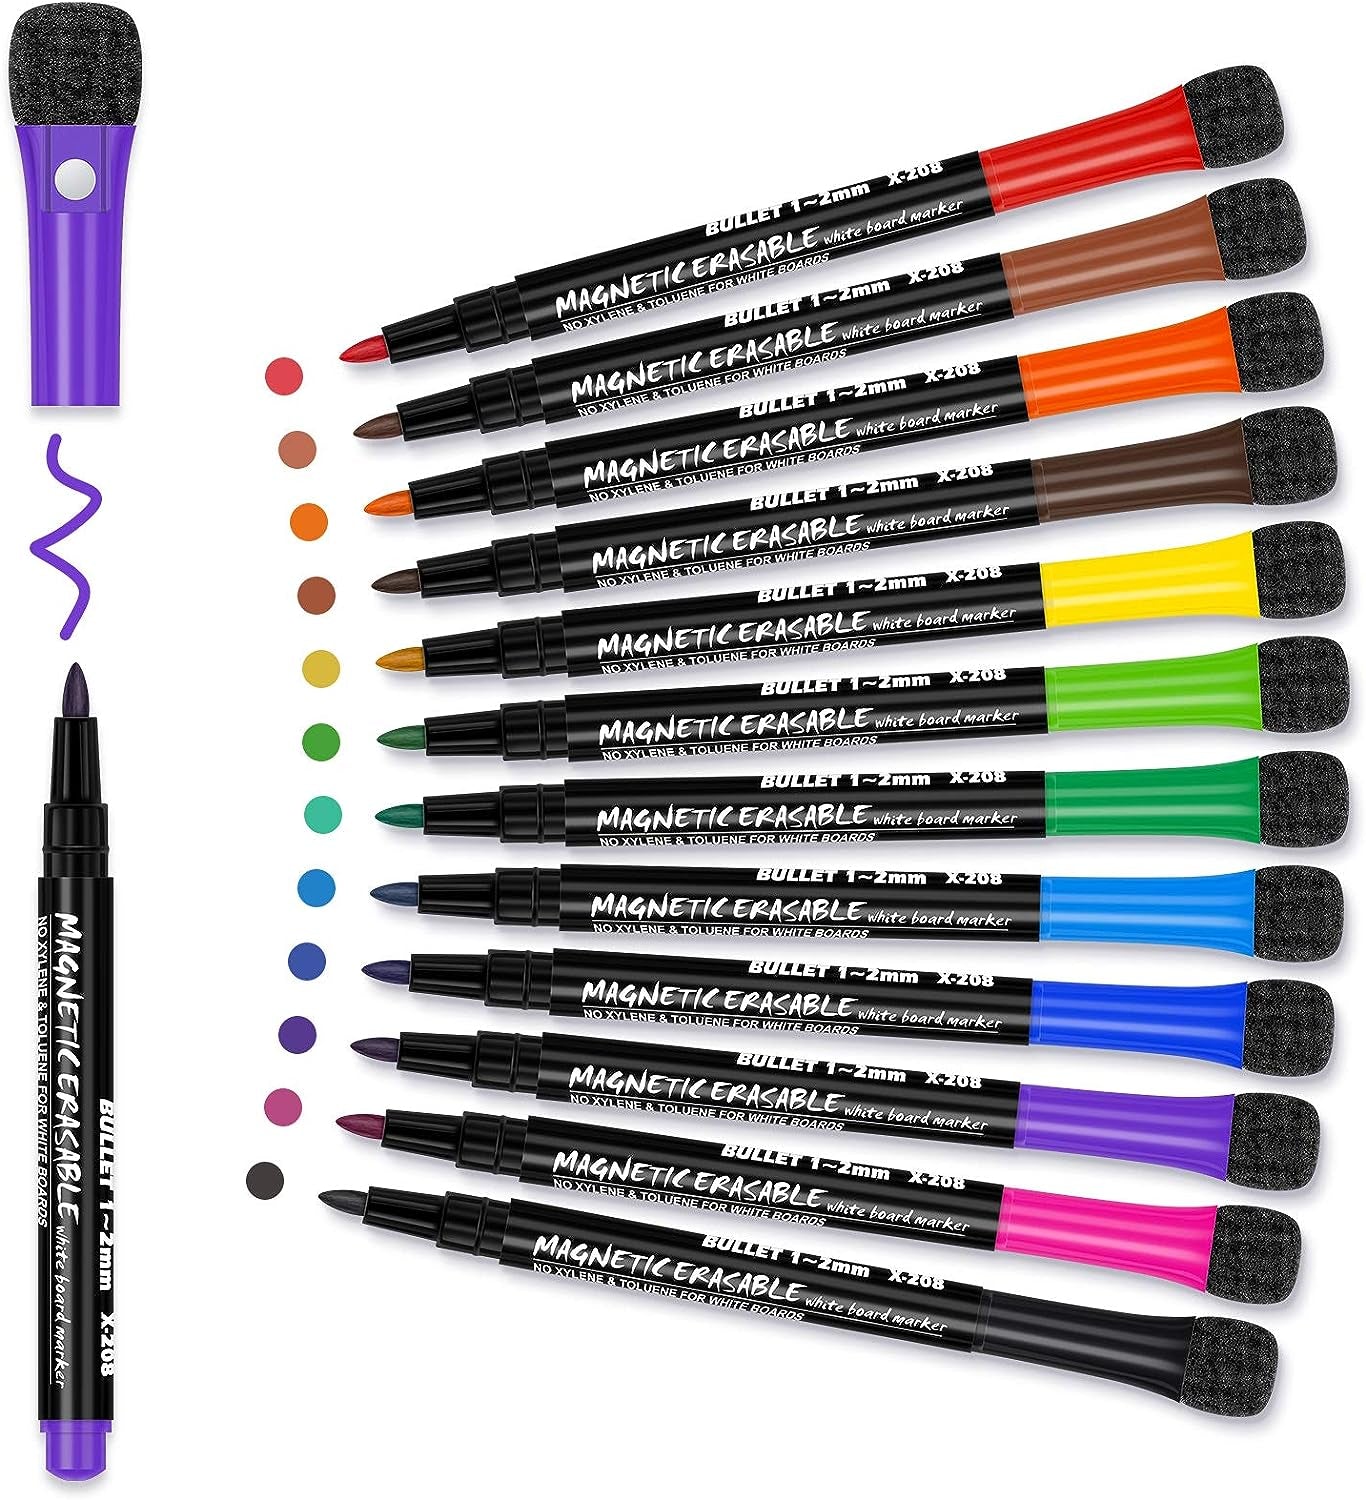 Magnetic Dry Erase Markers Fine: 12 Colors Erasable Whiteboard Markers Fine Point with Eraser Cap, Low Odor White Board Dry Erase Pens Fine Tip for Kids & Teachers, Home, Office and School Supplies